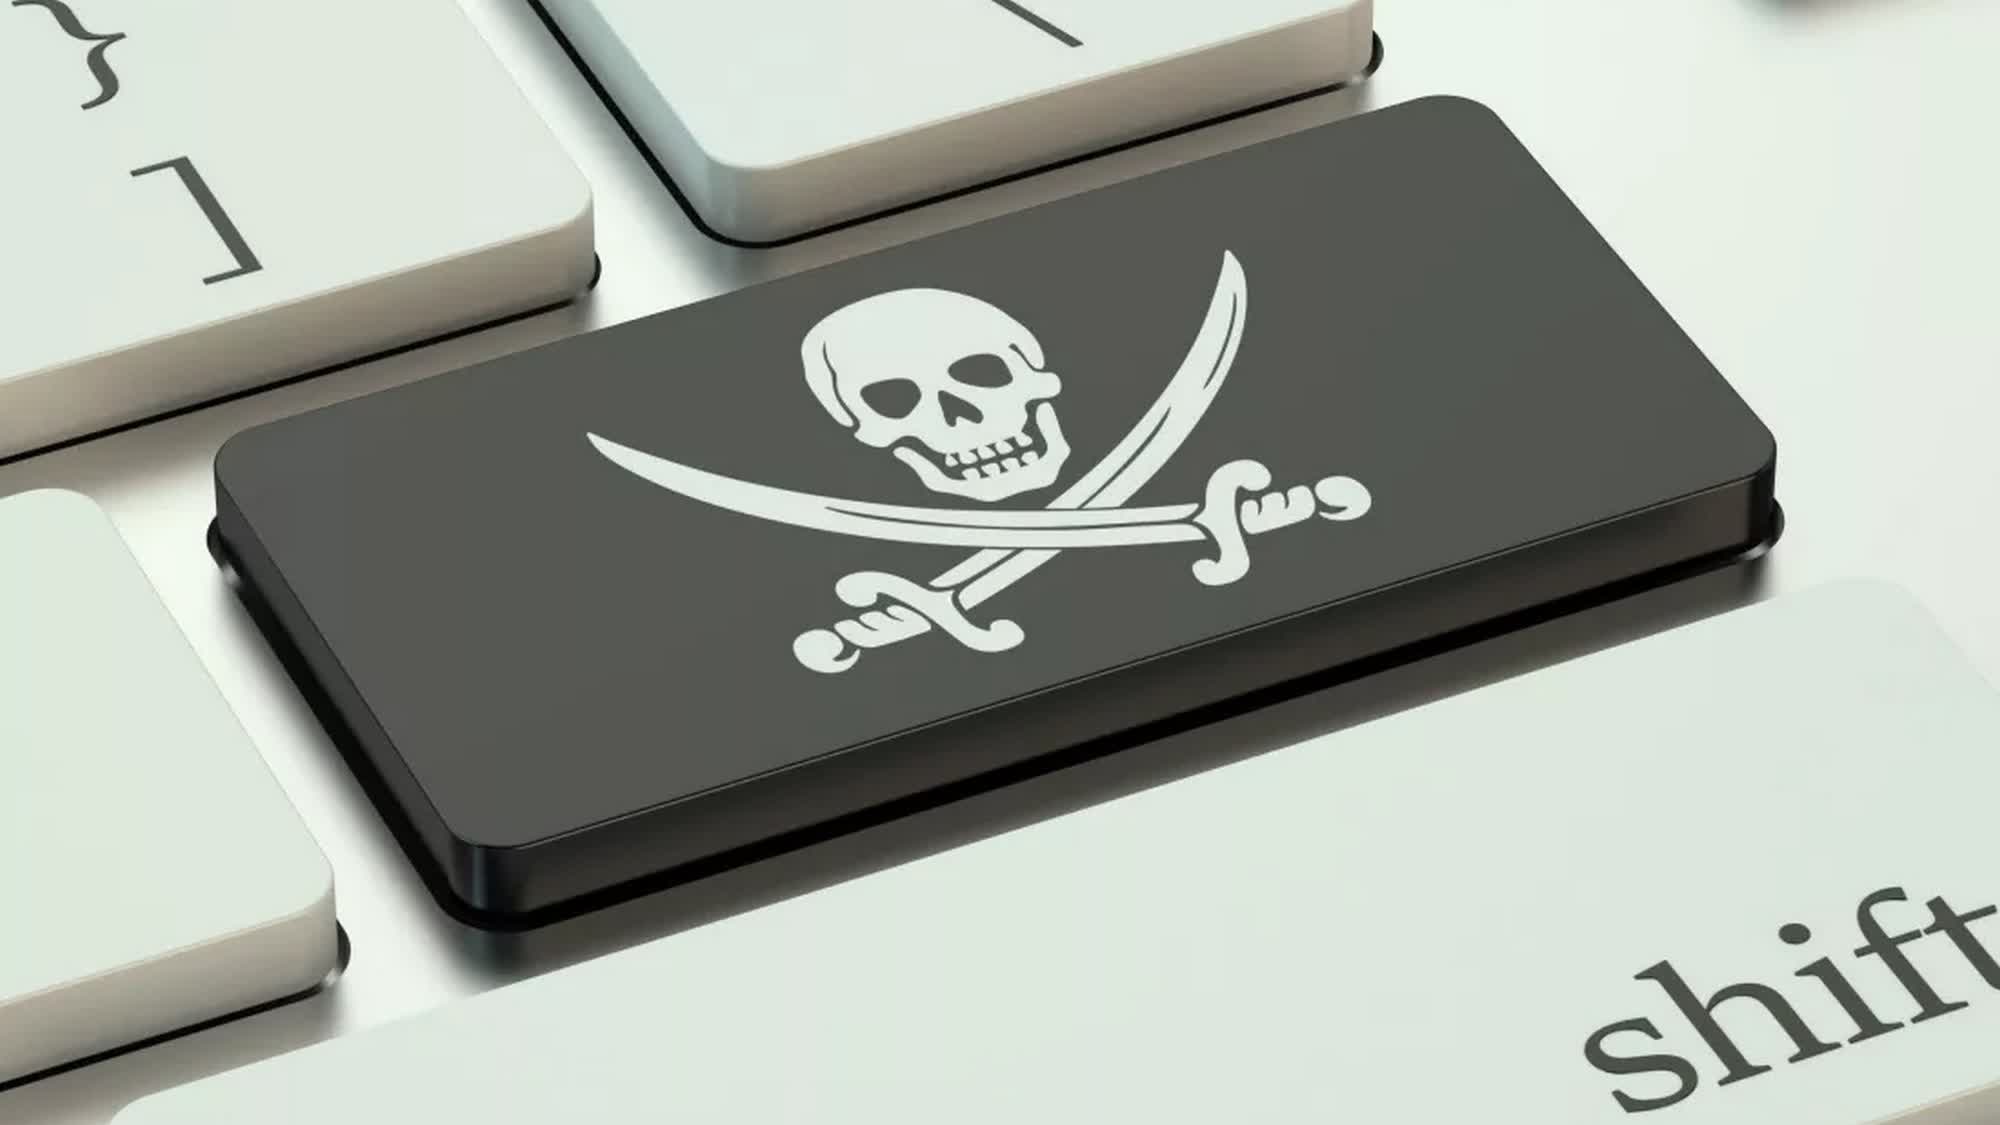 Almost 70% of Russian gamers are pirating in the wake of sanctions